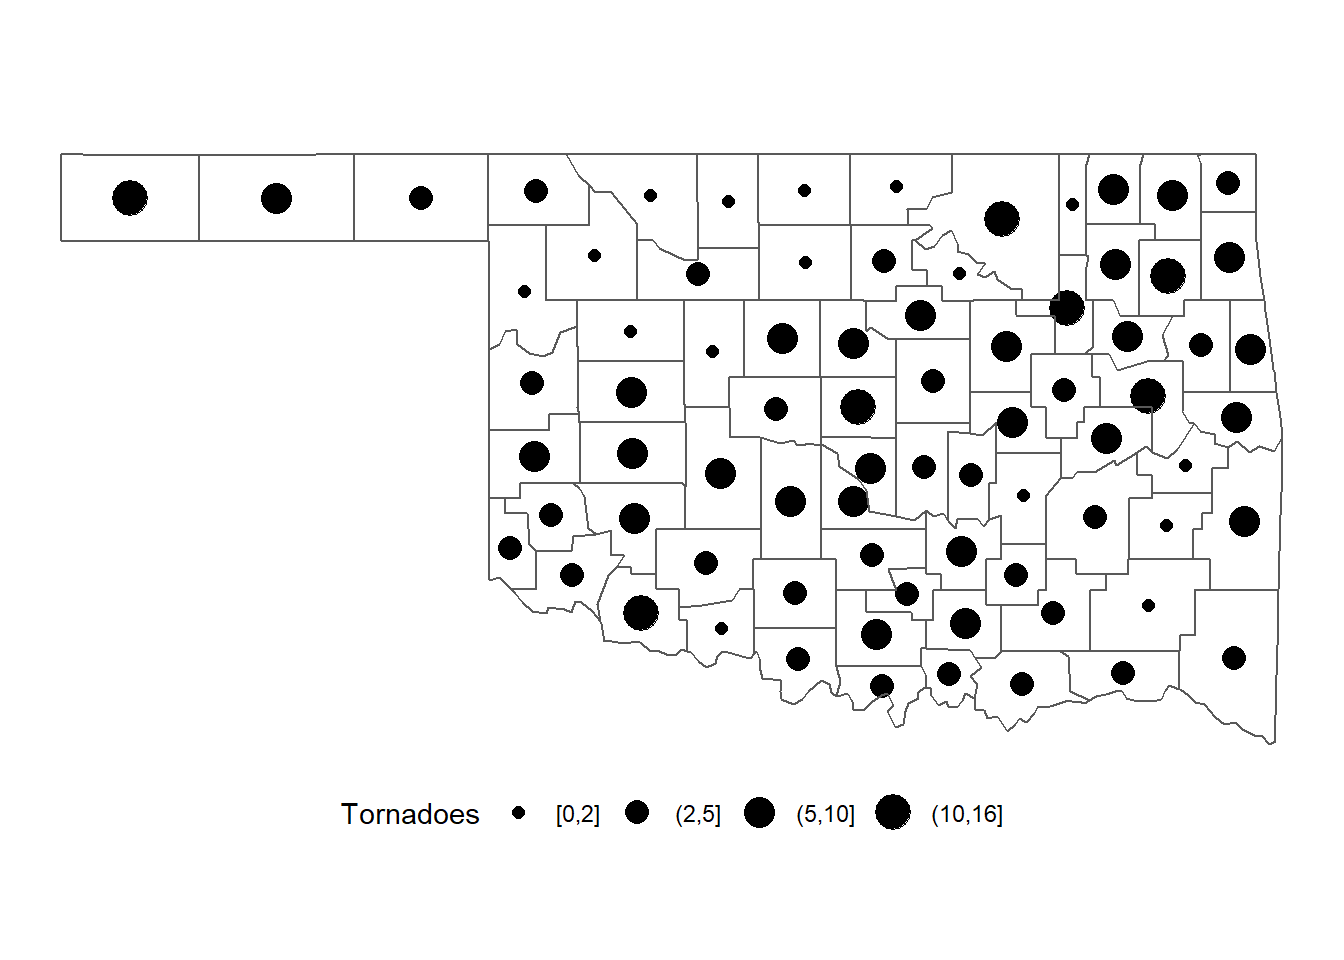 Numbers of tornadoes in Oklahoma counties from 2016-2021 mapped as graduate symbols with categories.